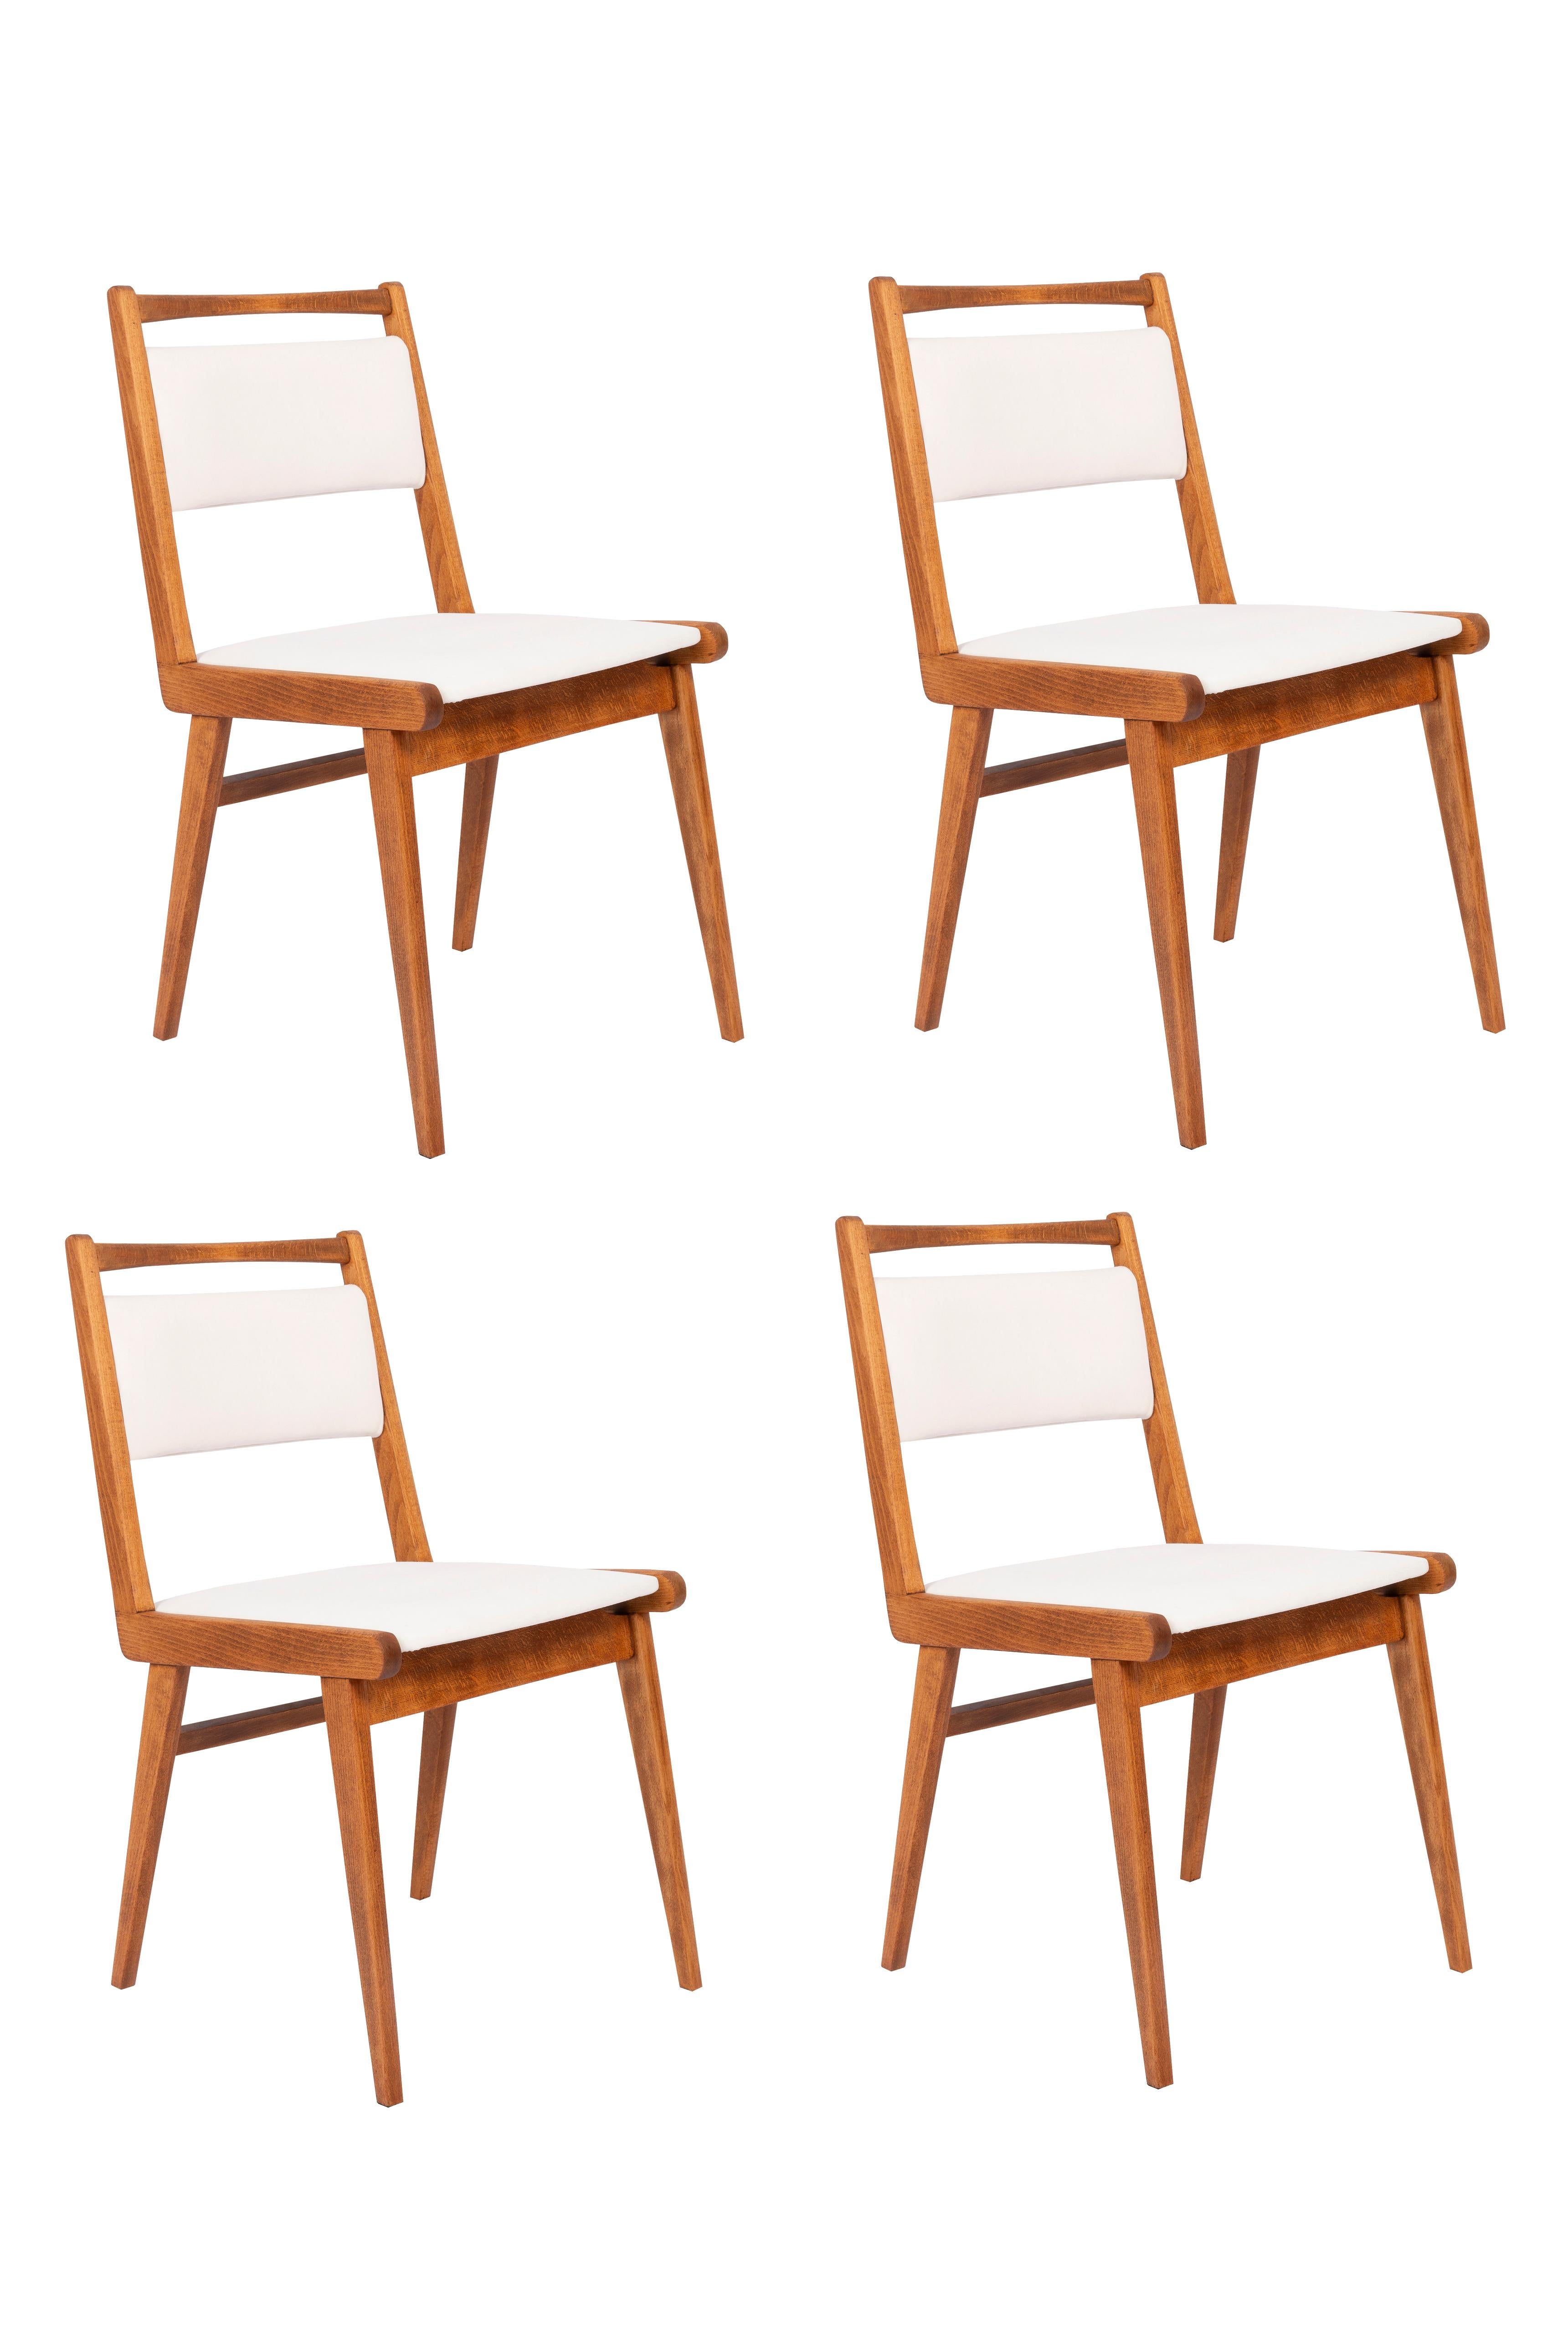 Chairs designed by Prof. Rajmund Halas. It is JAR type model. Made of beechwood. Chairs are after a complete upholstery renovation, the woodwork has been refreshed. Seat and back is dressed in a white, durable and pleasant to the touch velvet